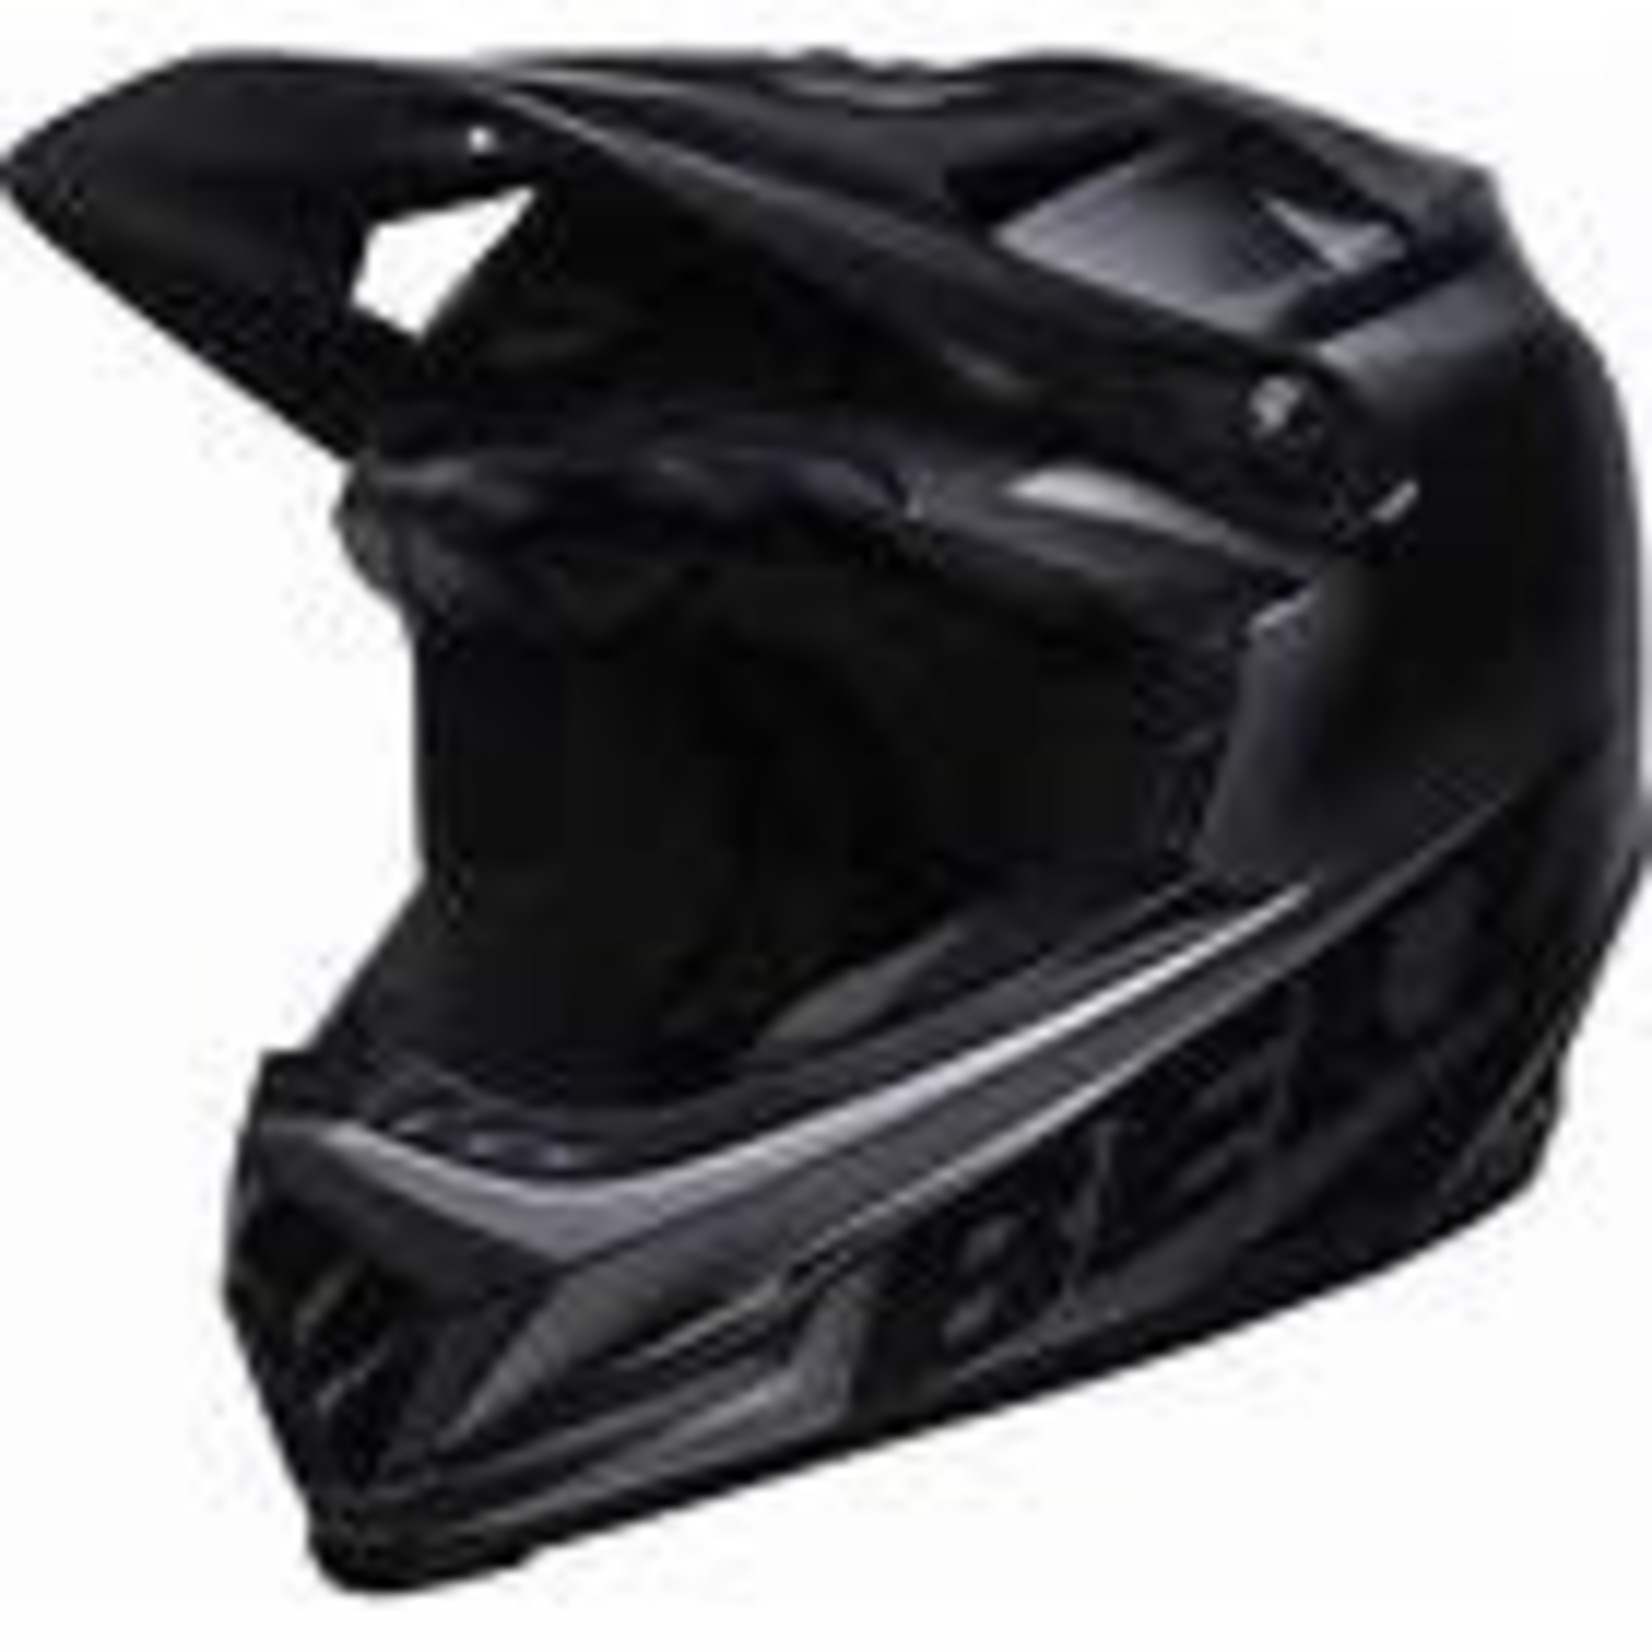 BELL MOTO-9 YOUTH MIPS 7116122SMP Y L/XL